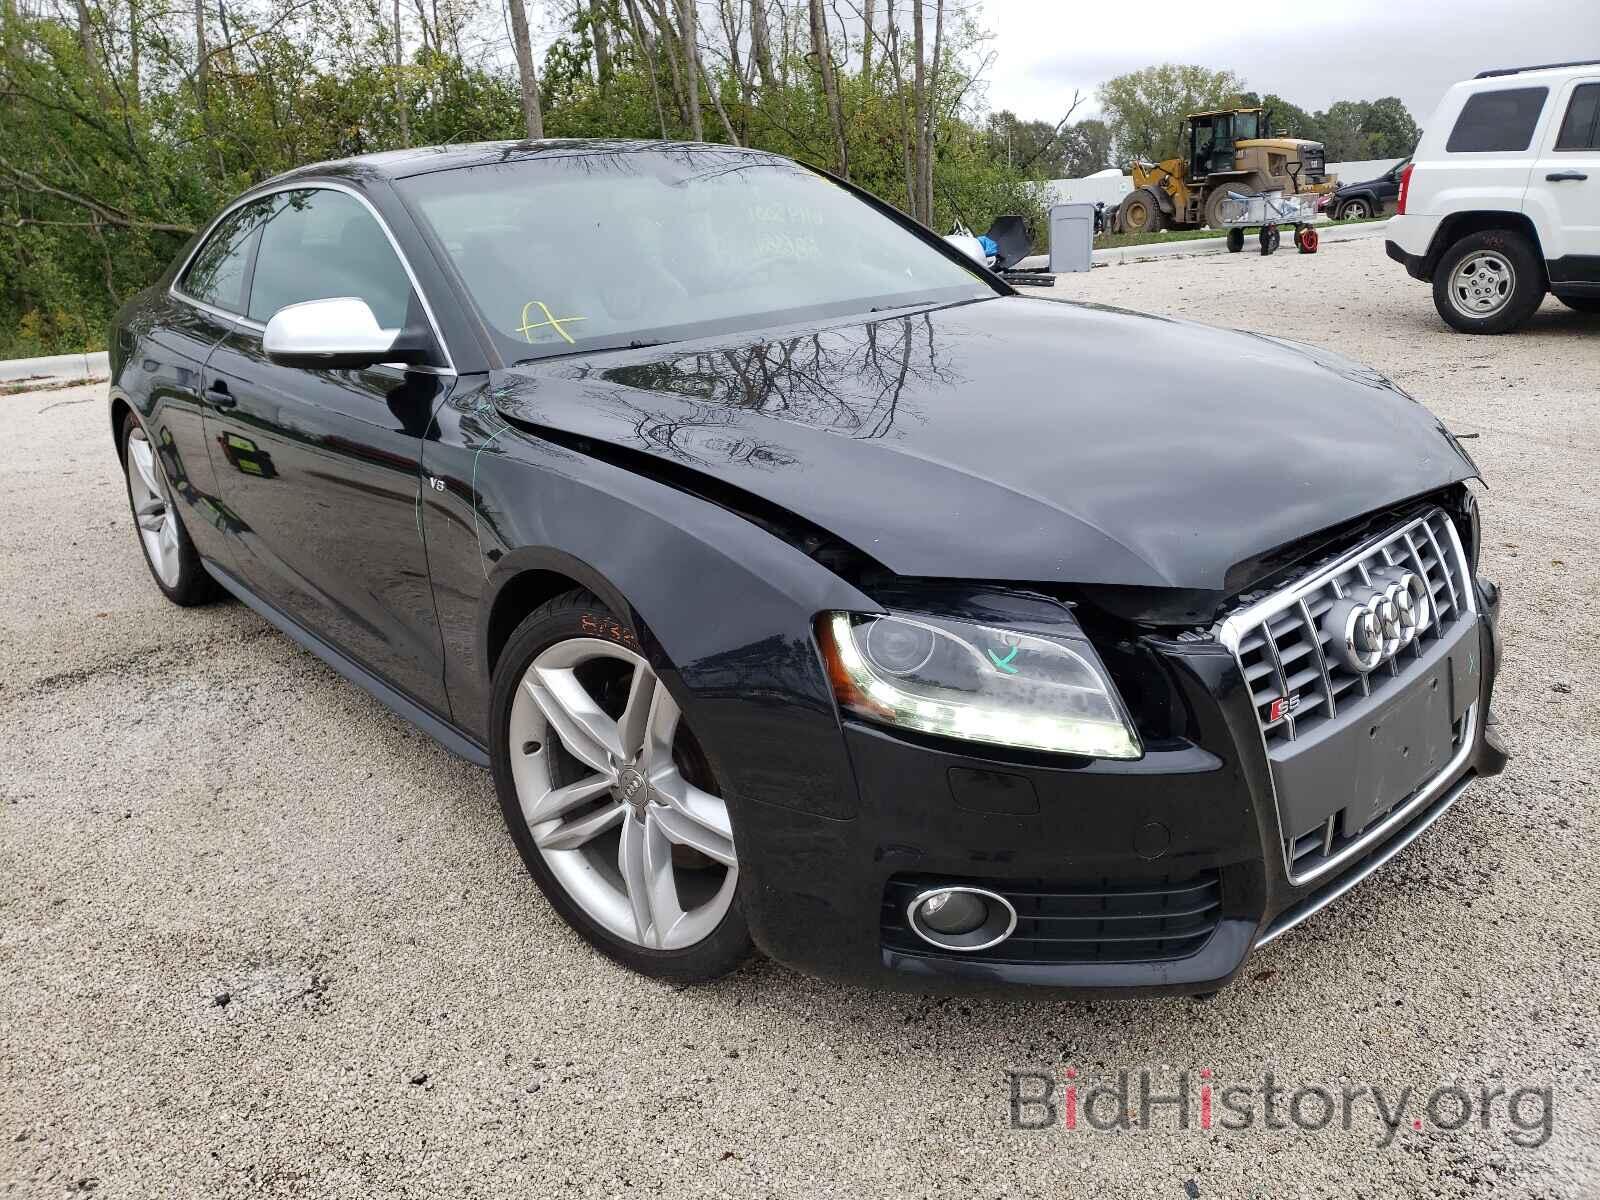 Photo WAUVVAFR4BA045665 - AUDI S5/RS5 2011